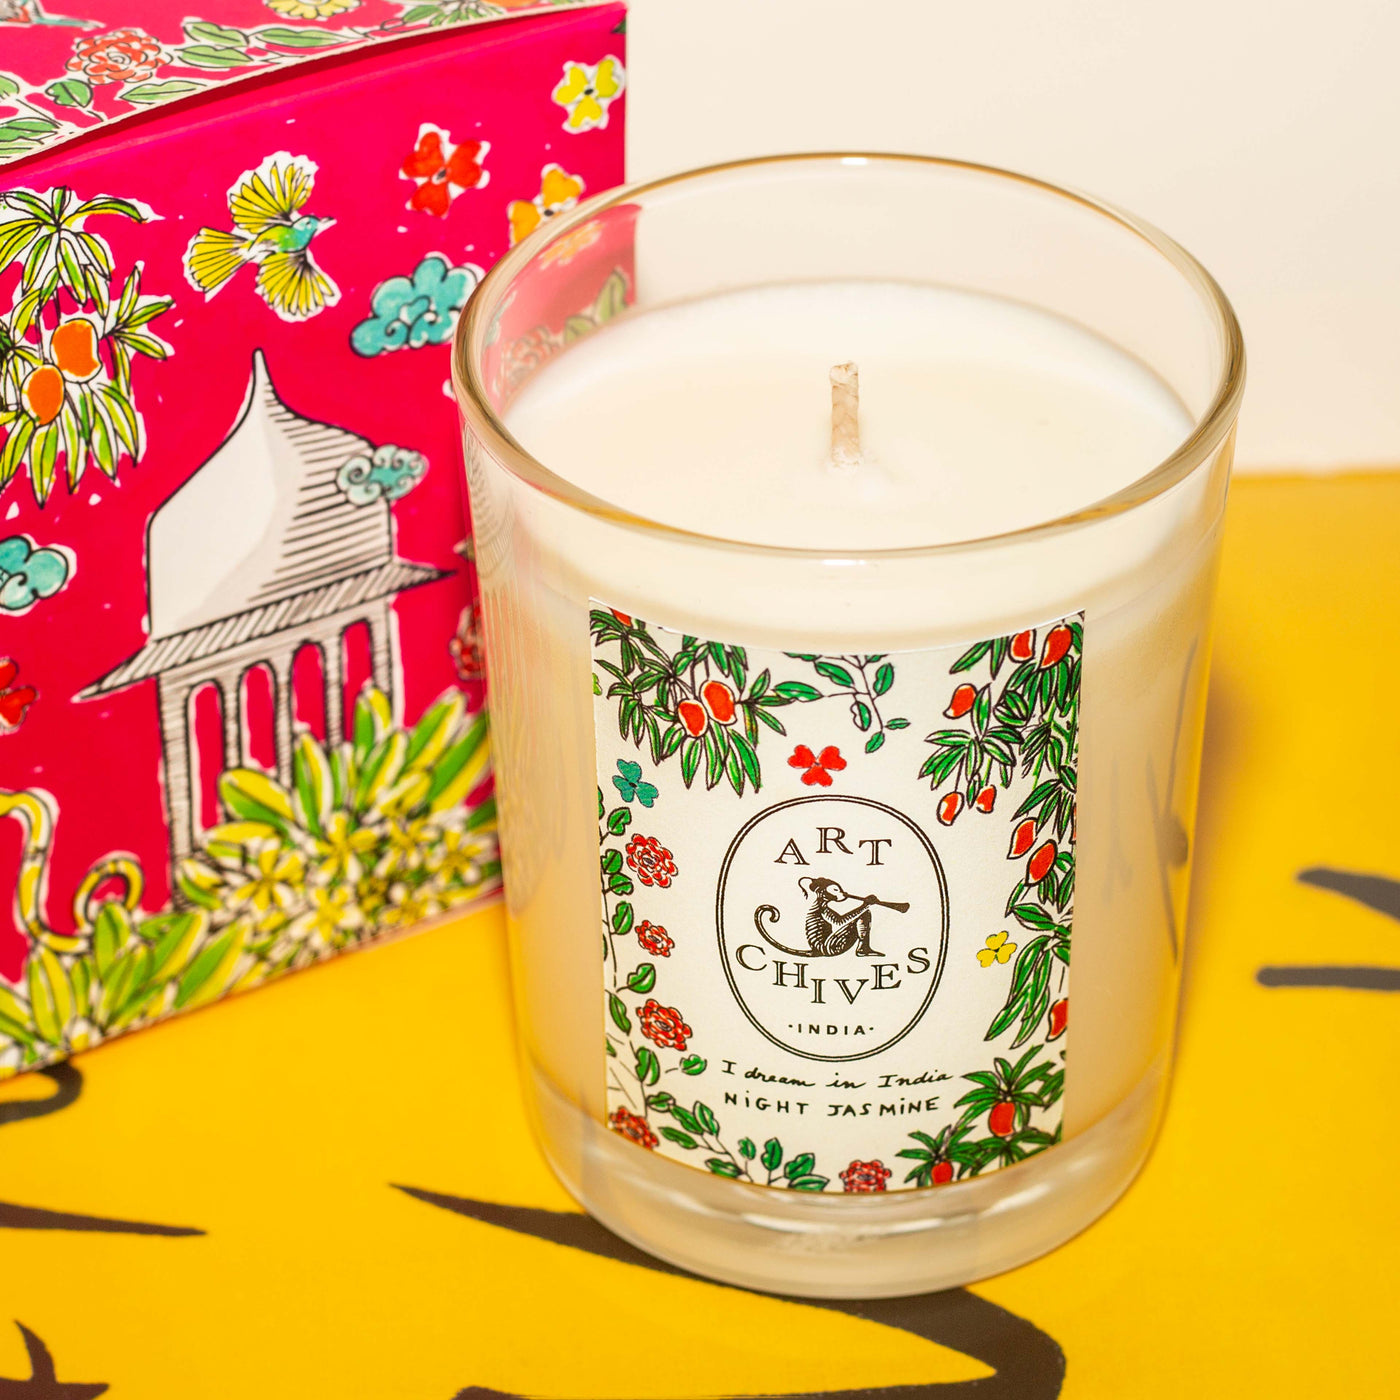 ART-CHIVES INDIA Night Jasmine - Fragranced soy candle